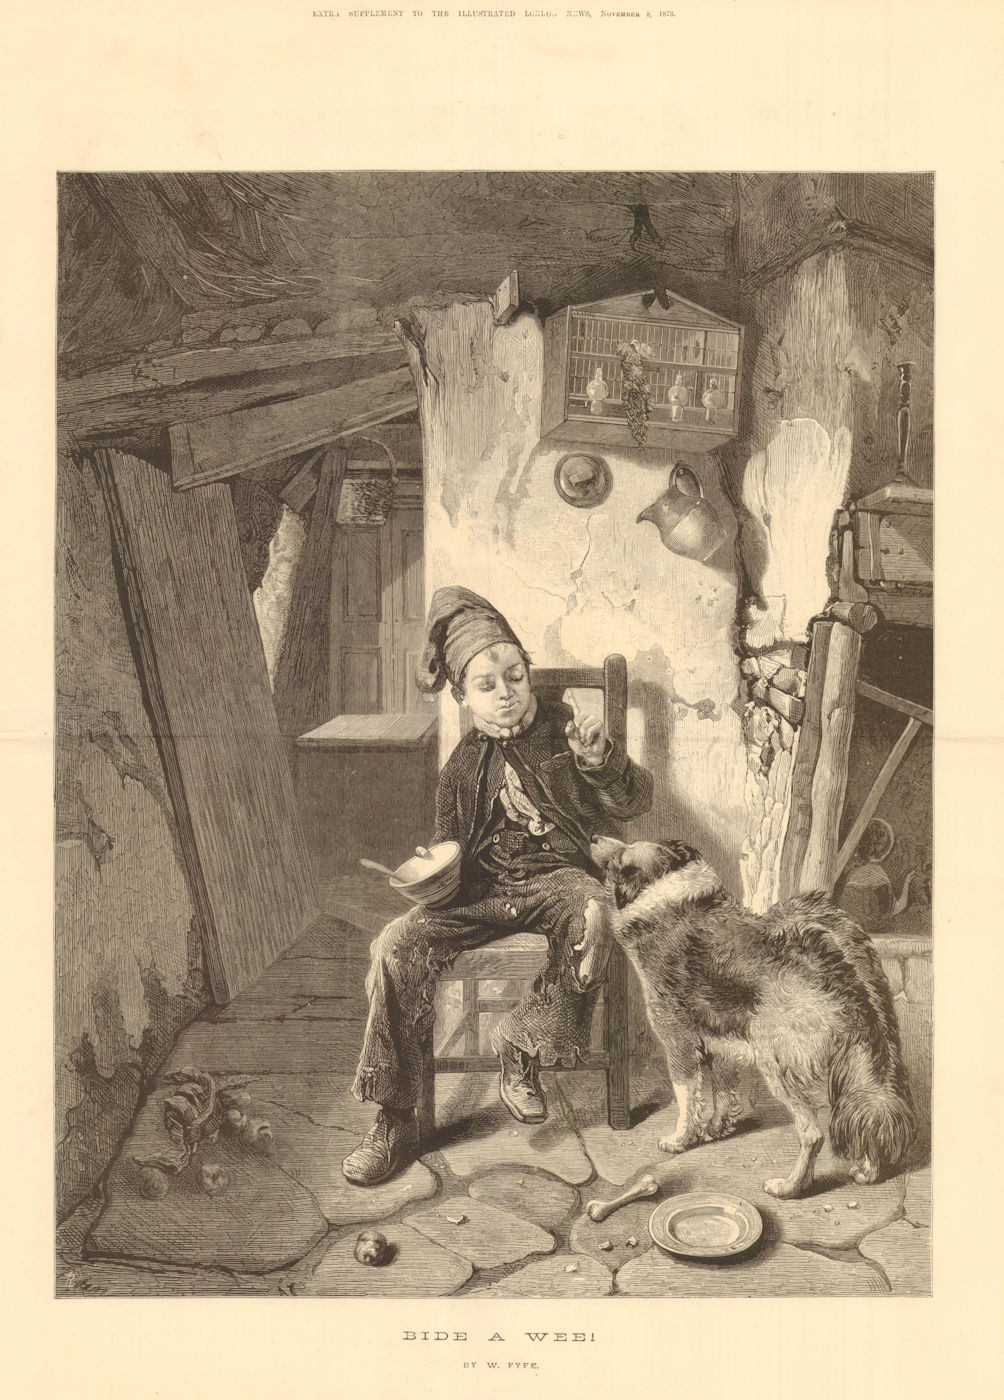 Bide a Wee By W Fyfe. Child eating & dog 1873 antique ILN full page print